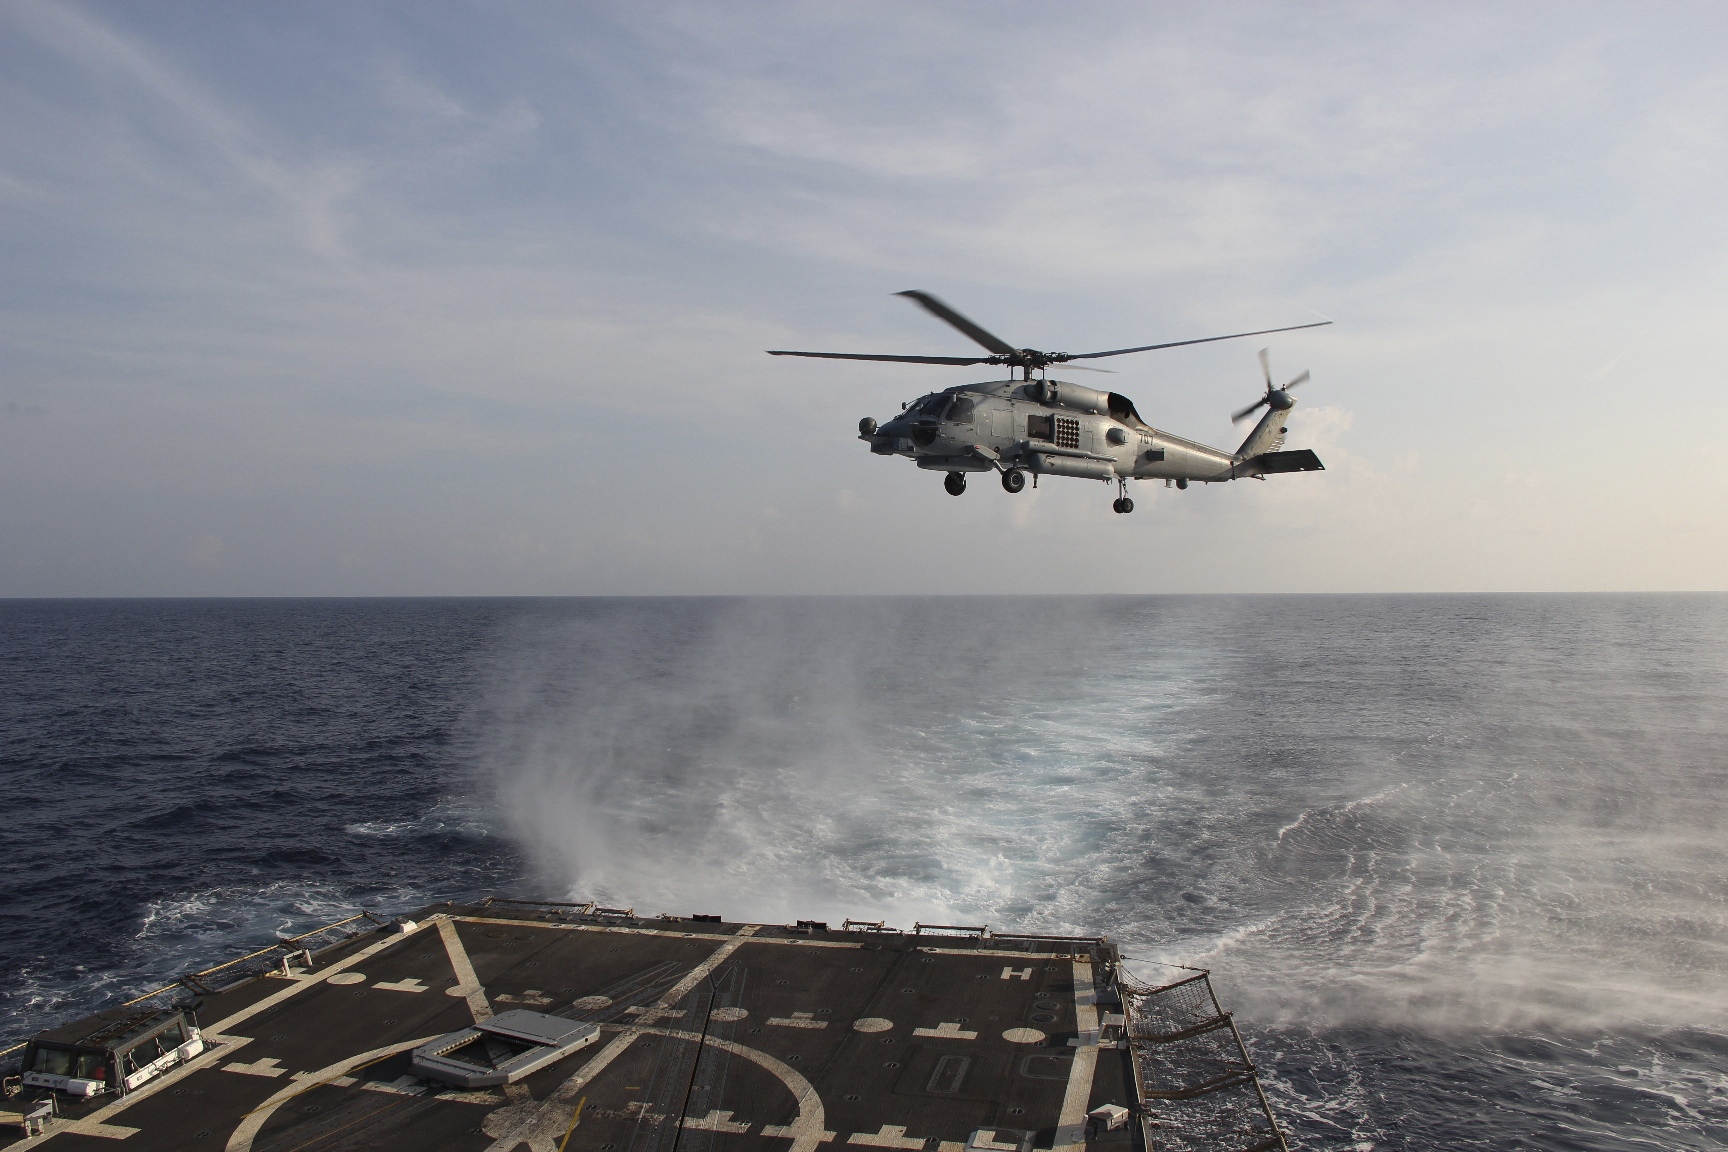 A US Navy SH-60R Seahawk helicopter takes off from a carrier in the Gulf of Thailand to assist in the search for missing Malaysian Airlines flight MH370. Photo: Reuters